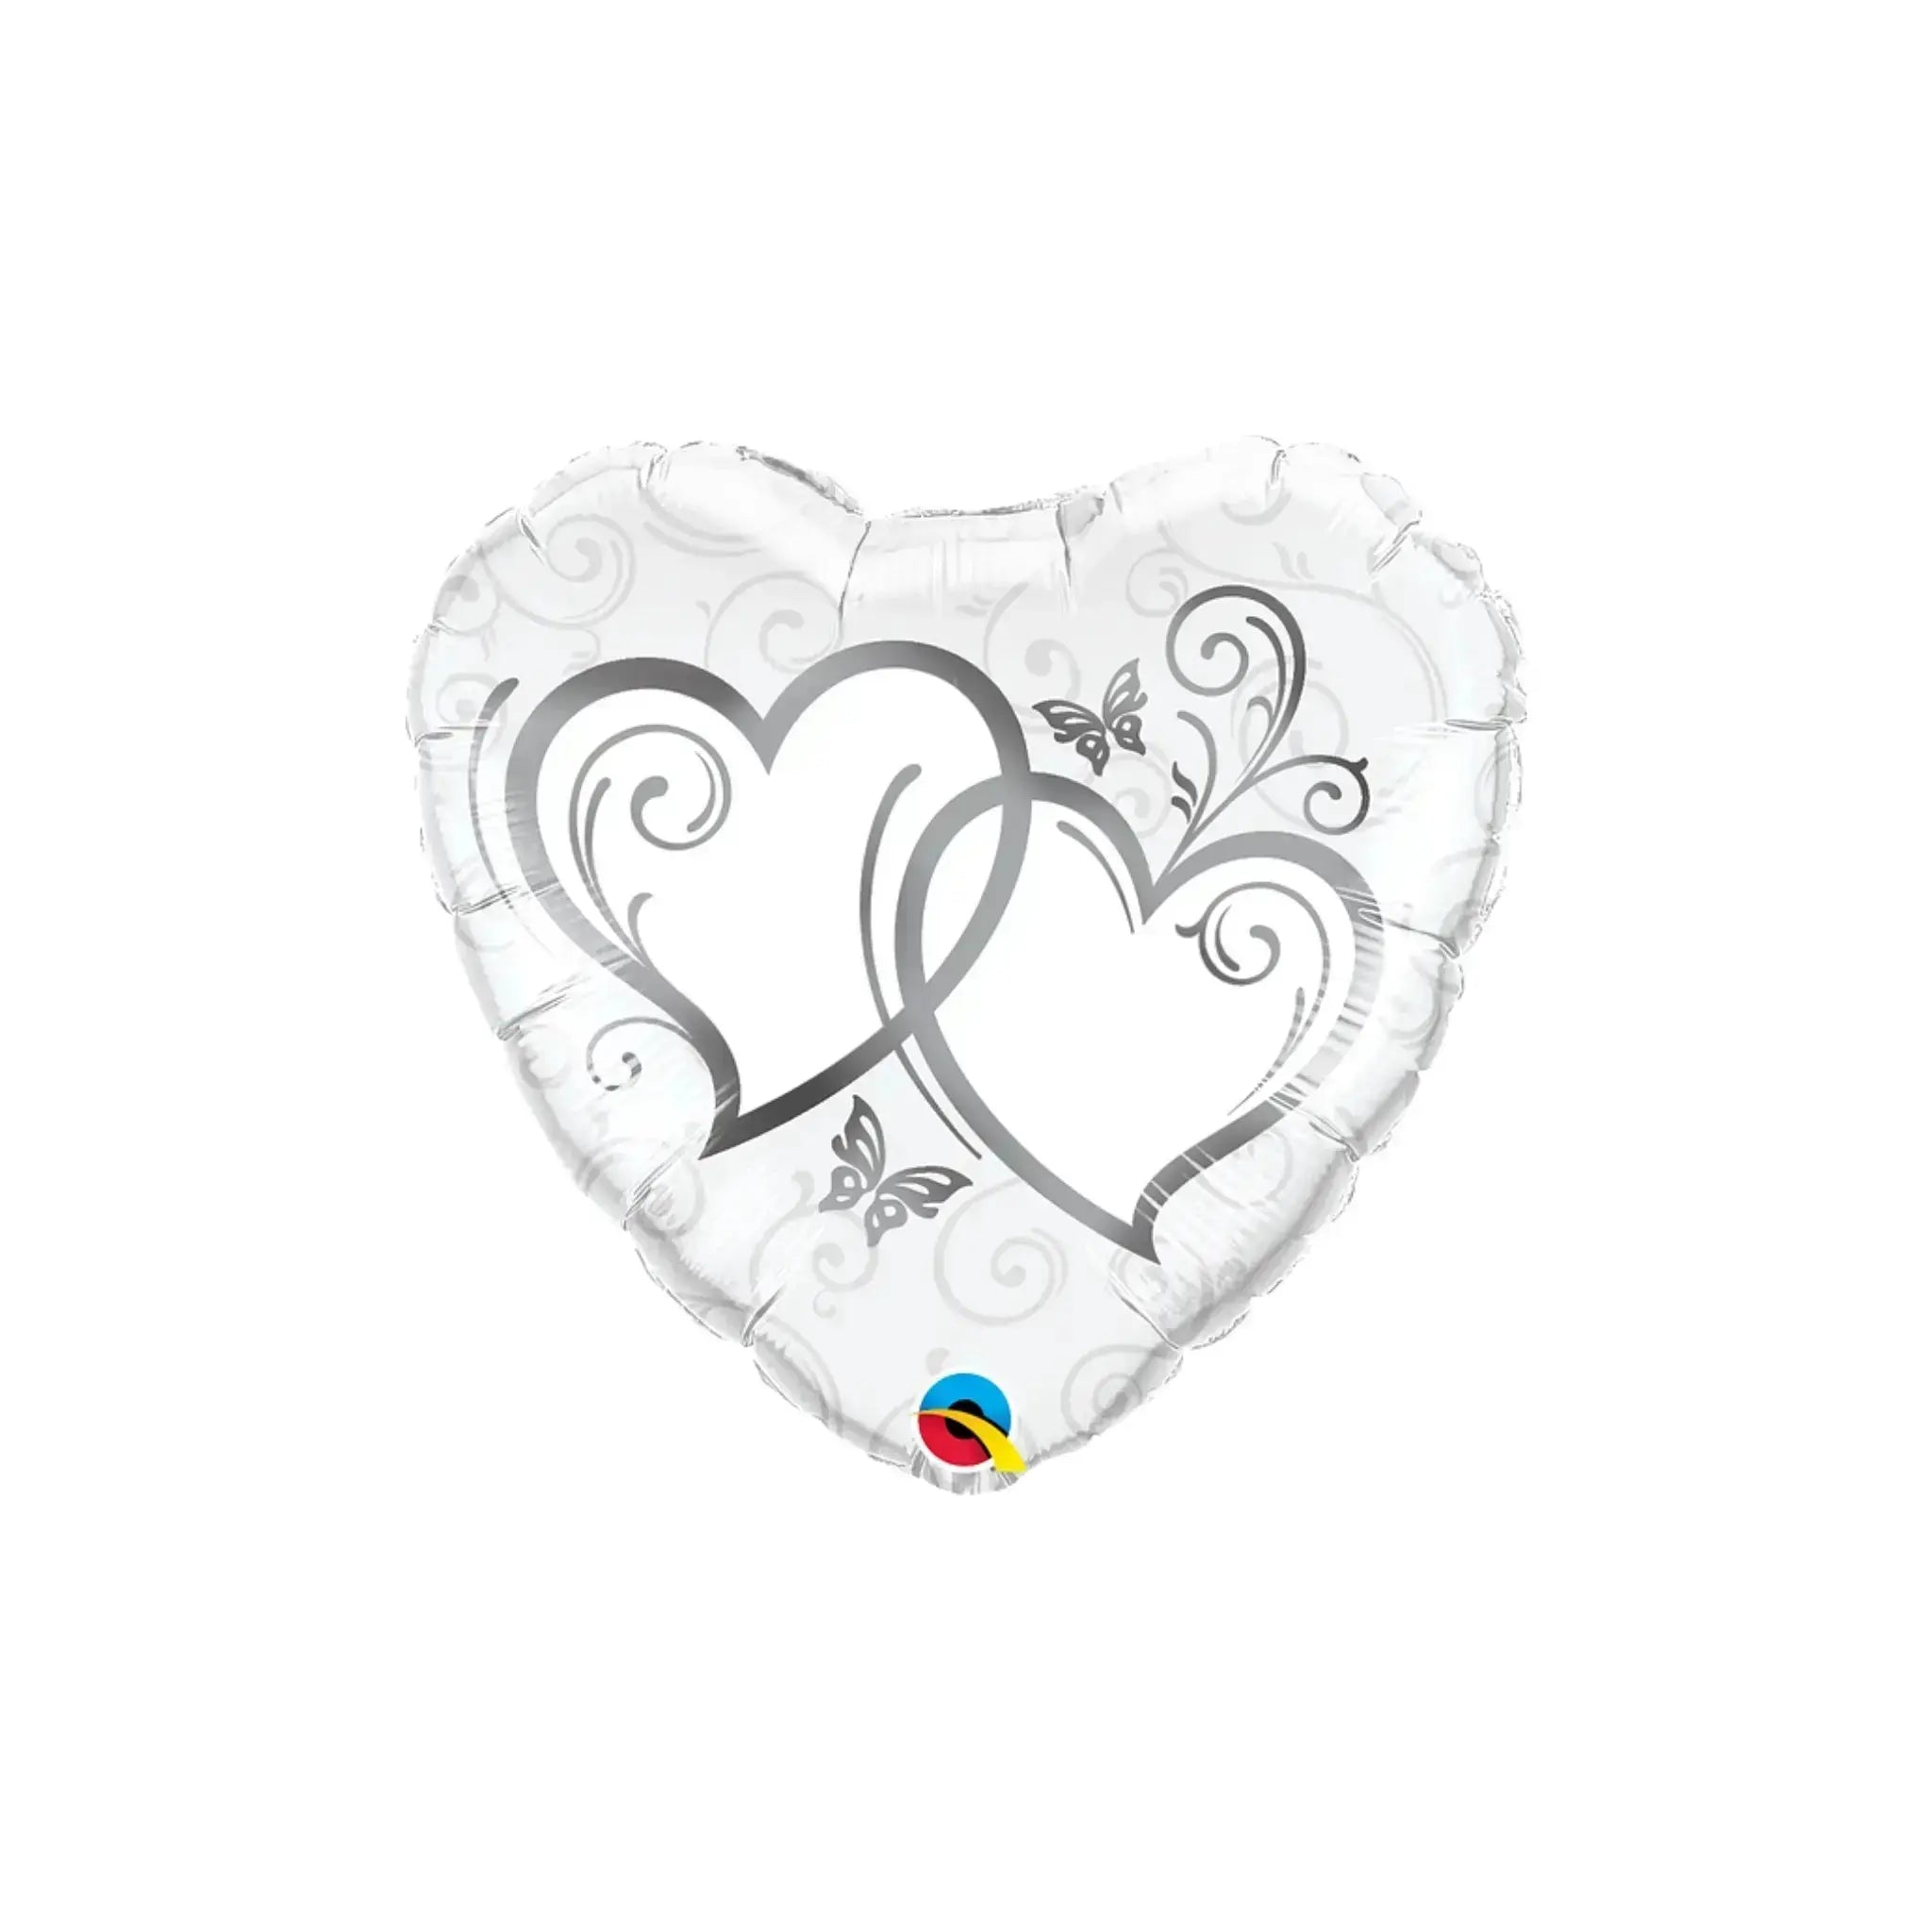 Entwined Silver Hearts Balloon | The Party Hut